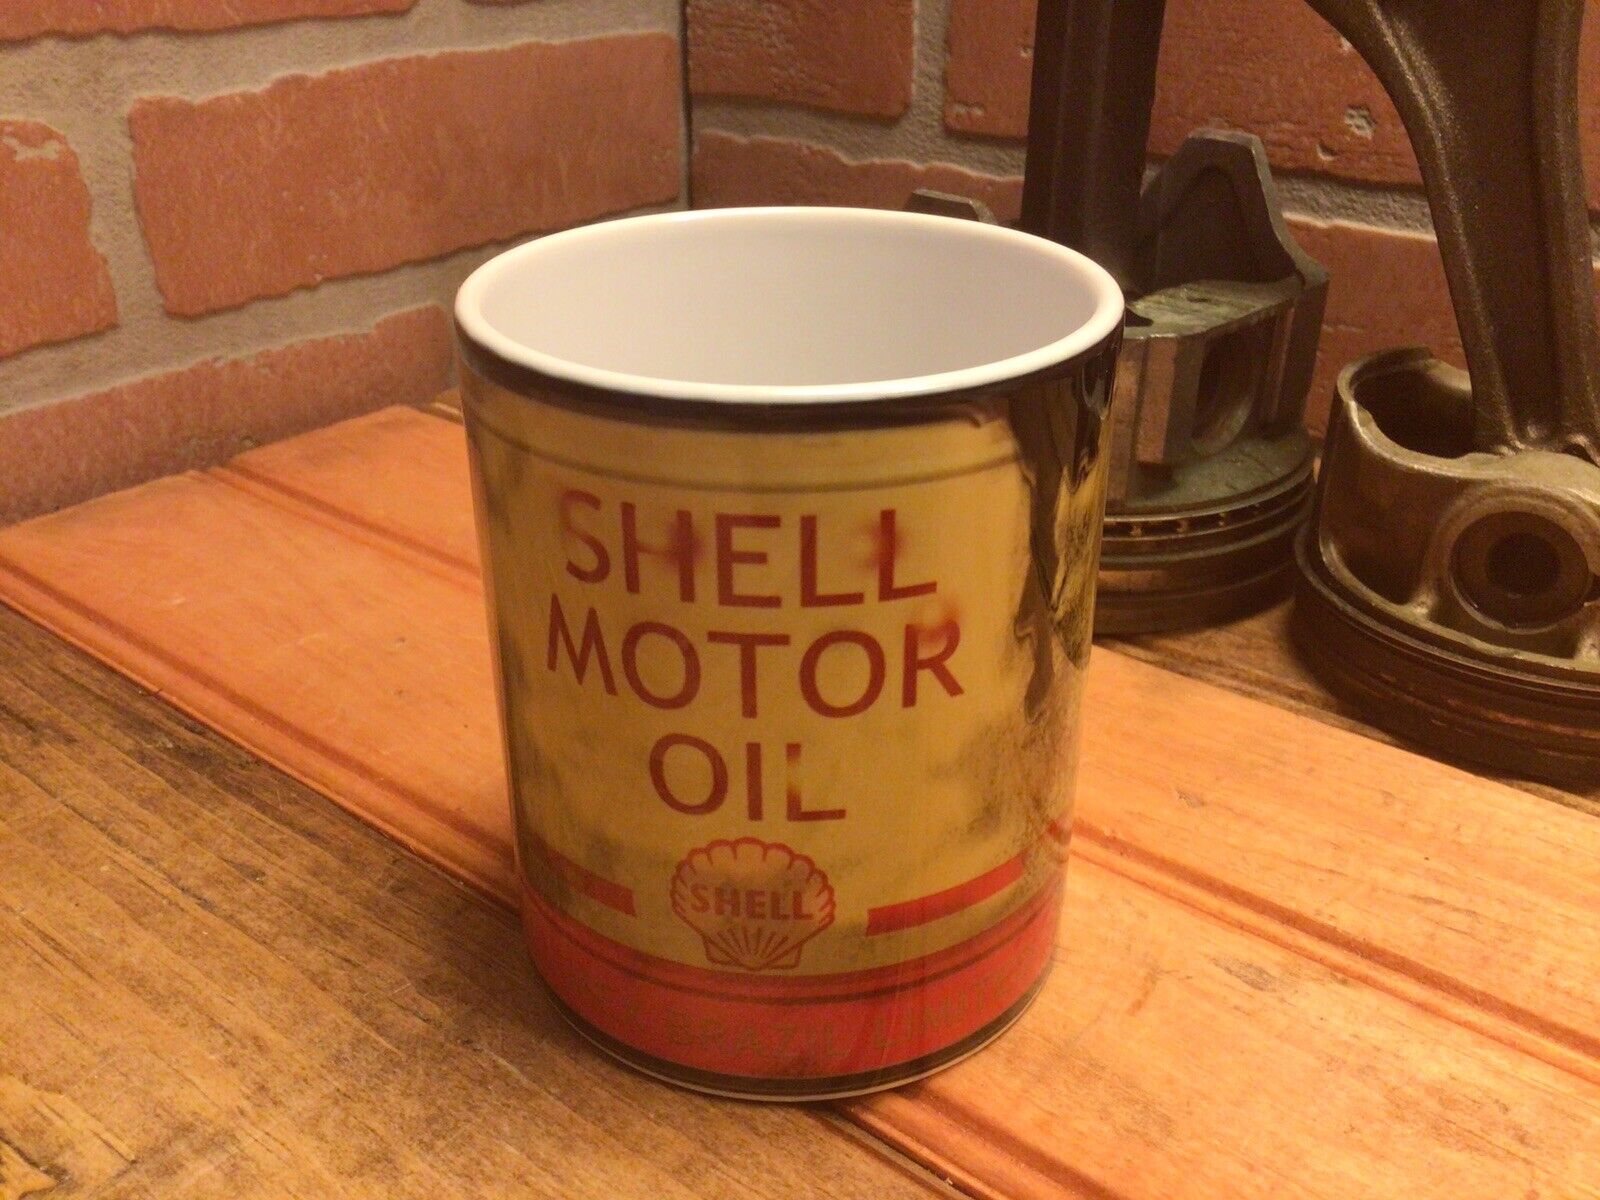 American Brand Studio - Shell Motor Oil Can Lube Mug Makes a Great Gift for Dad